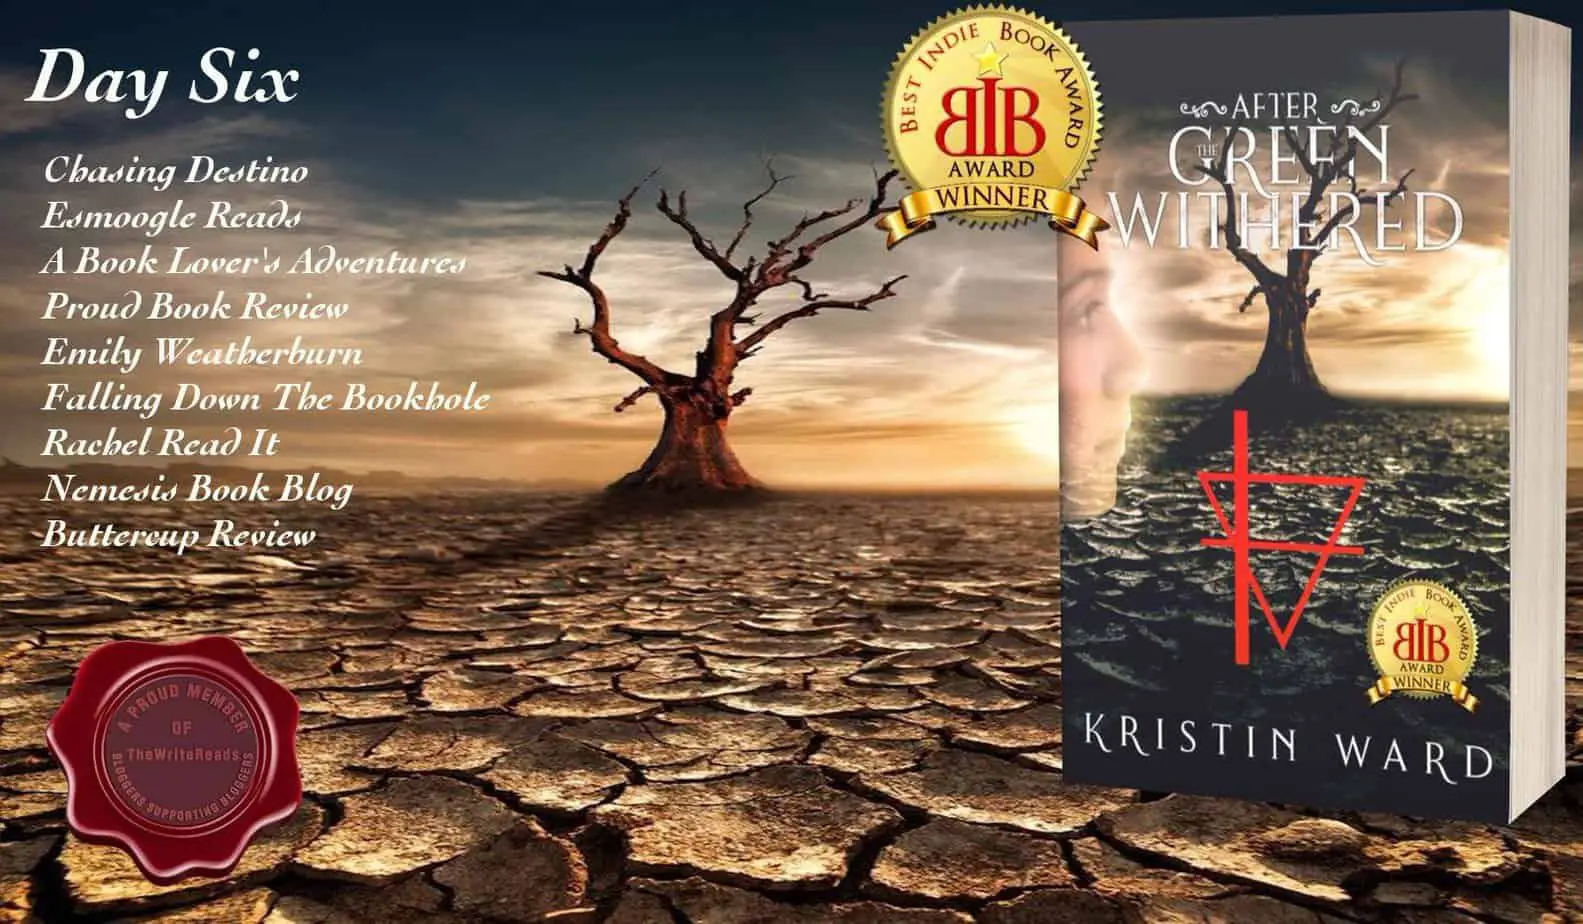 After the Green Withered dystopian fiction blog tour